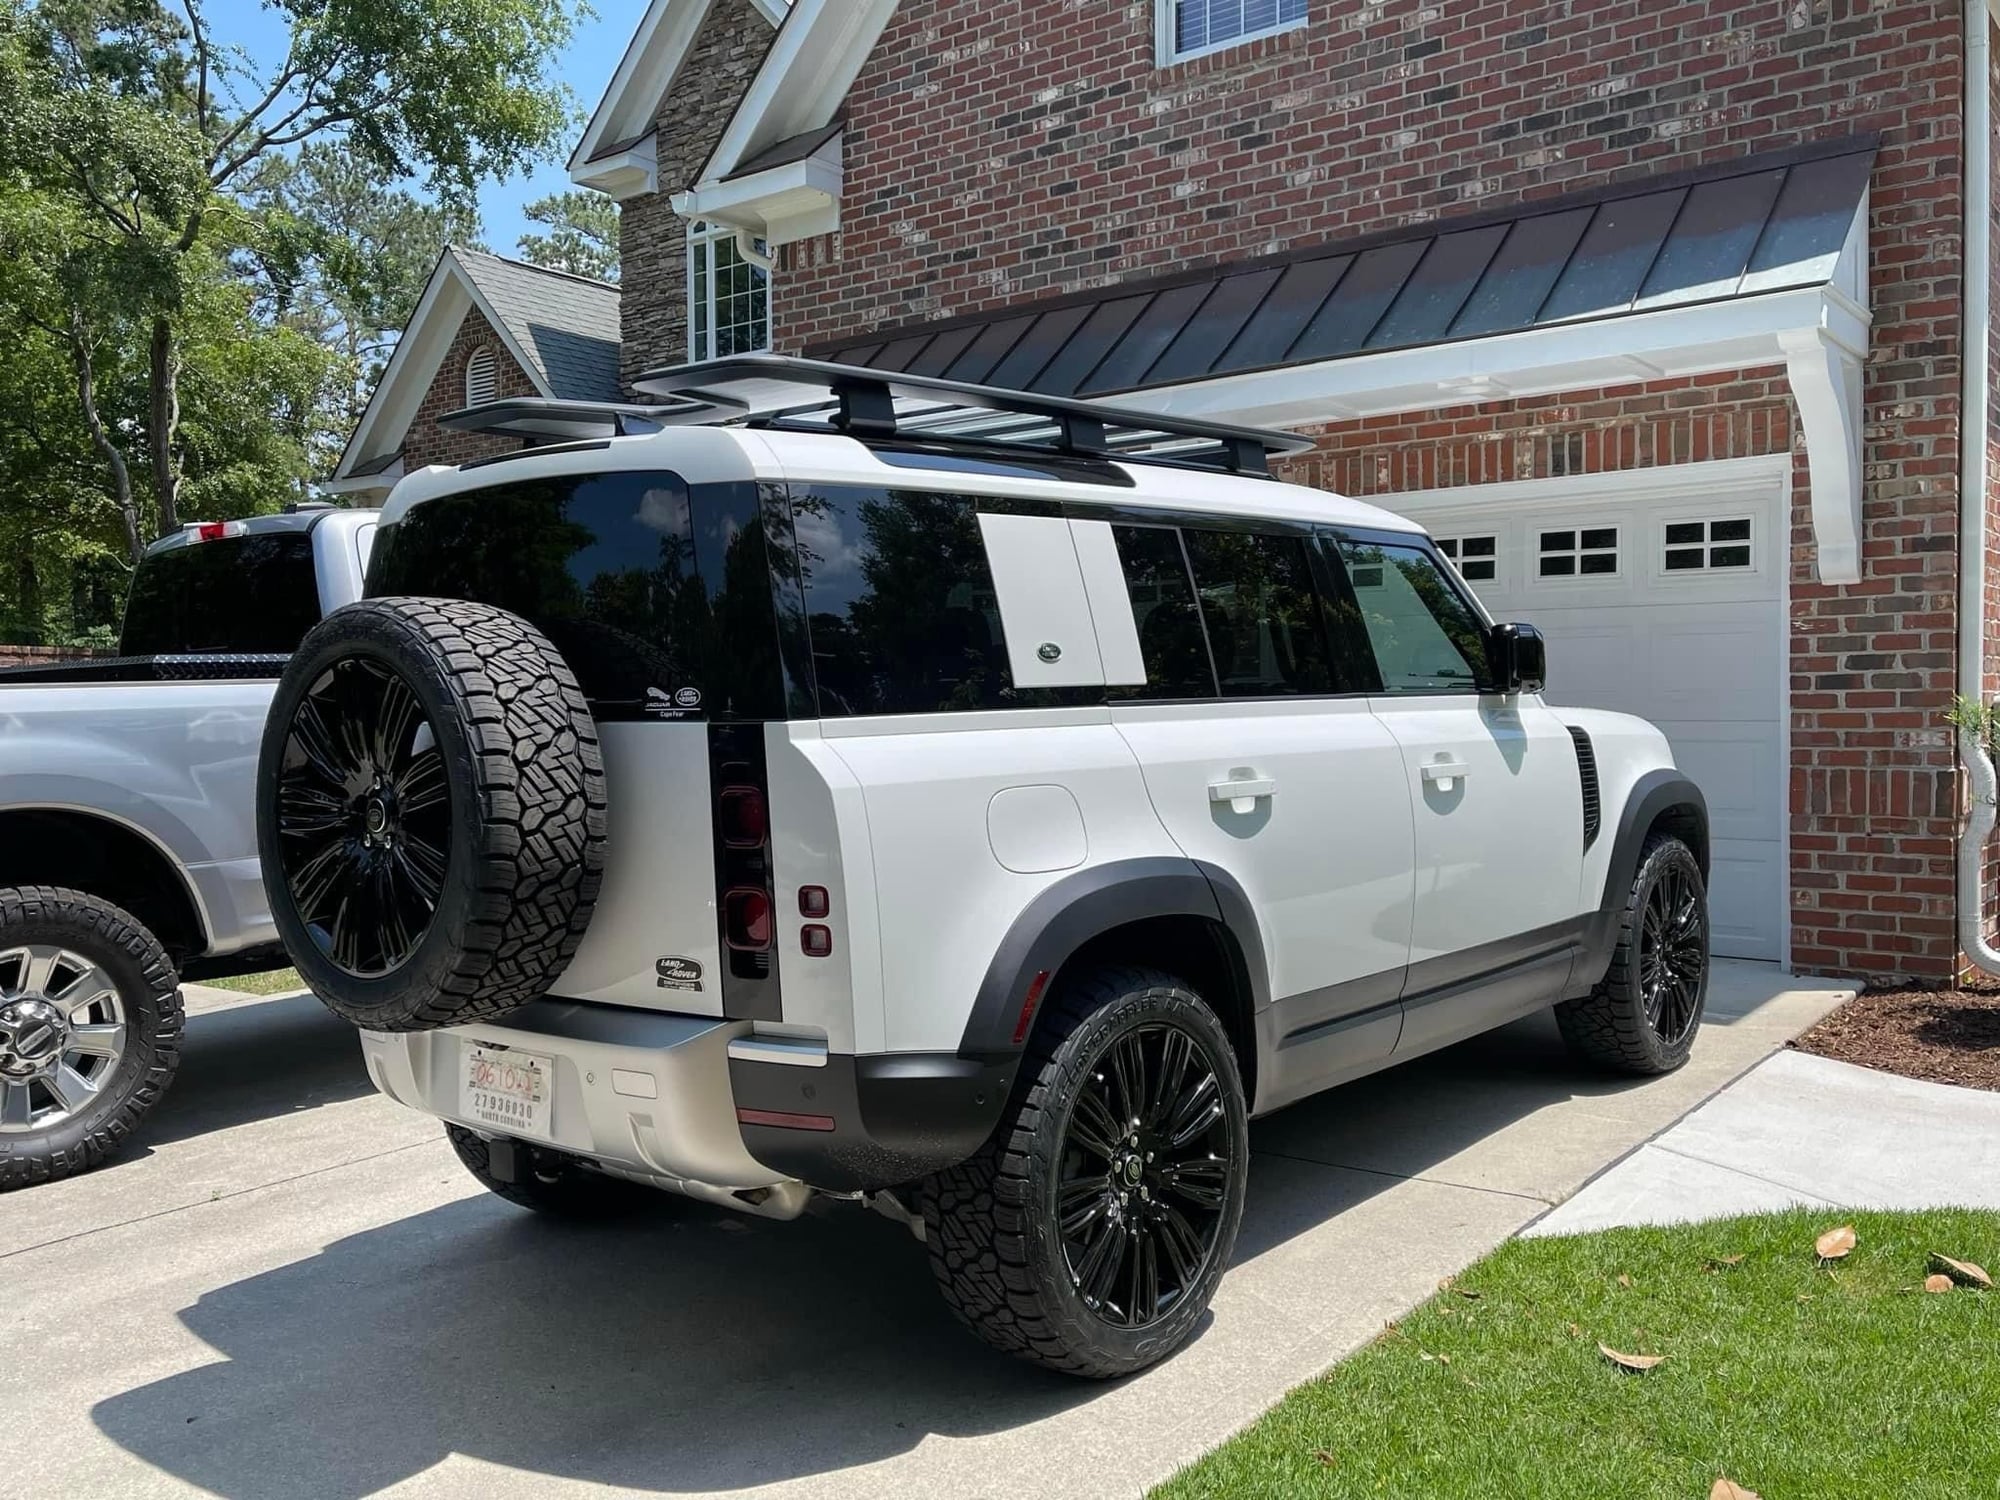 Wheels and Tires/Axles - 5 9012 range rover 22in wheels and Nitto AT Tires - Used - 2019 to 2023 Land Rover Defender - 2005 to 2023 Land Rover Range Rover - 2005 to 2023 Land Rover Range Rover Sport - Wilmington, NC 28403, United States